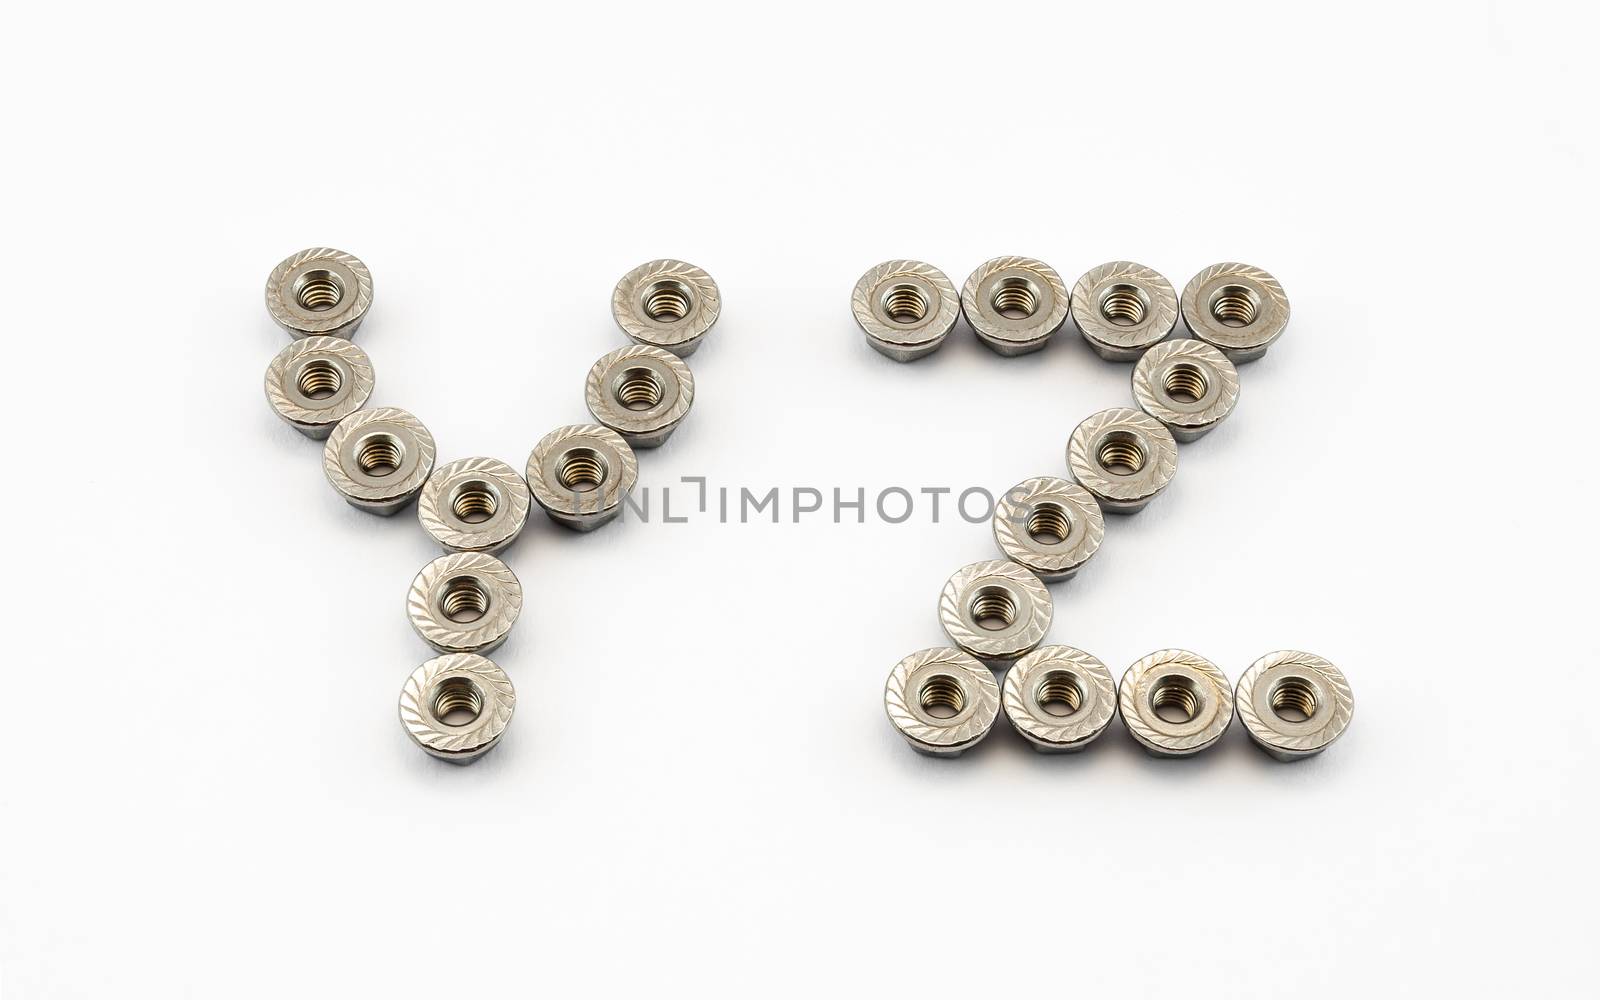 Y and Z Alphabet, Created by Stainless Steel Hex Flange Nuts by noneam